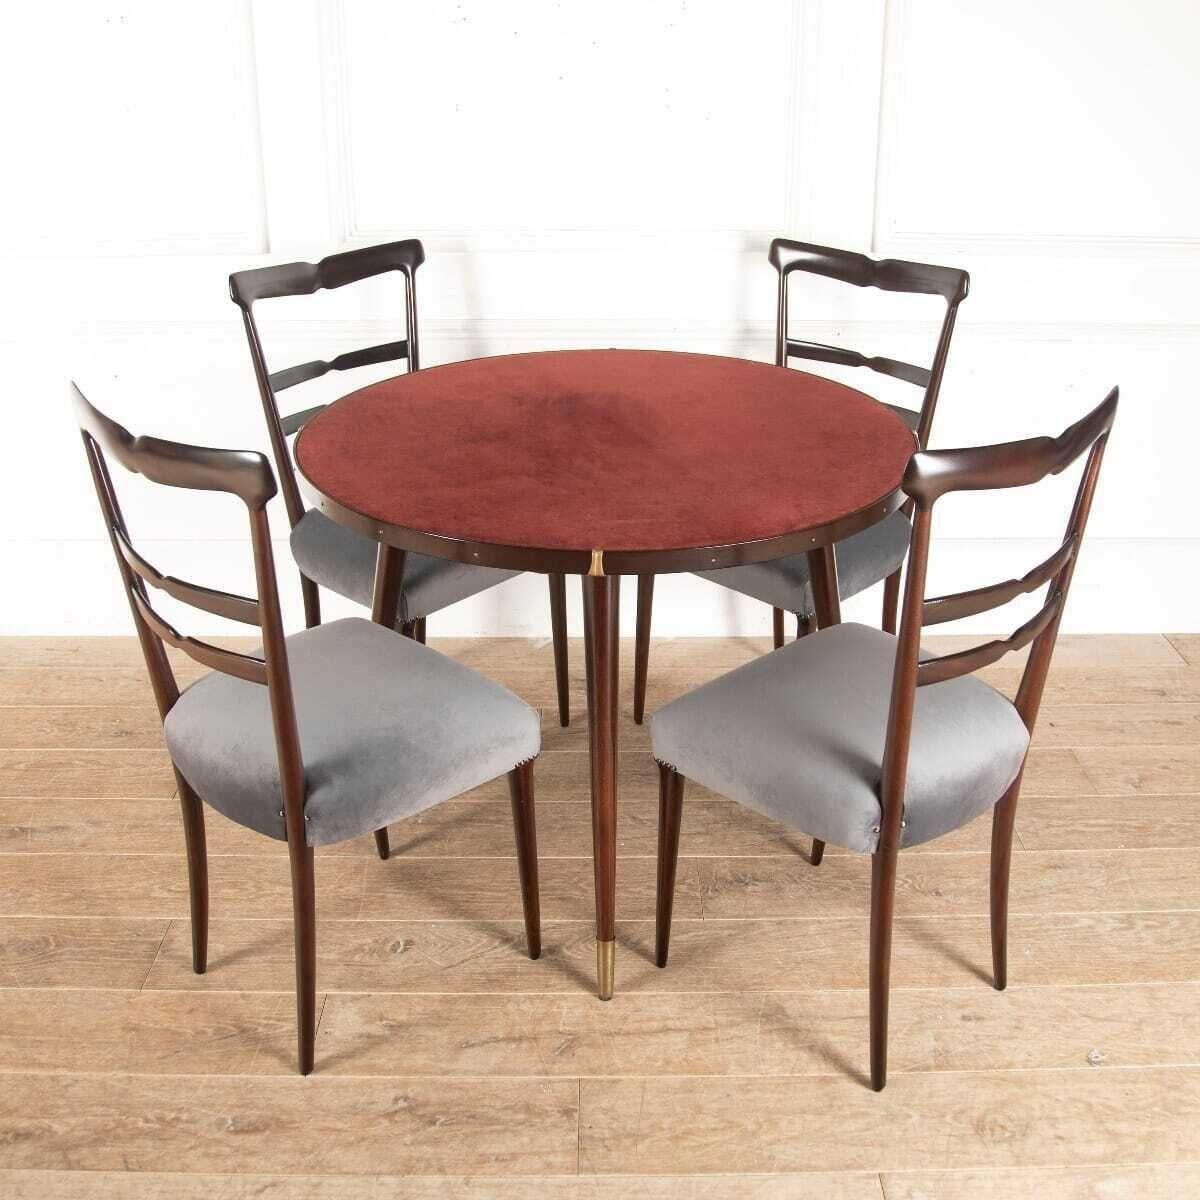 Smart circular games or breakfast table, in dark tinted mahogany. With four elegant high-backed dining chairs, which have been reupholstered in grey velvet. 
This table, with a dark glass top over an original brick red suede surface. Four swing-out